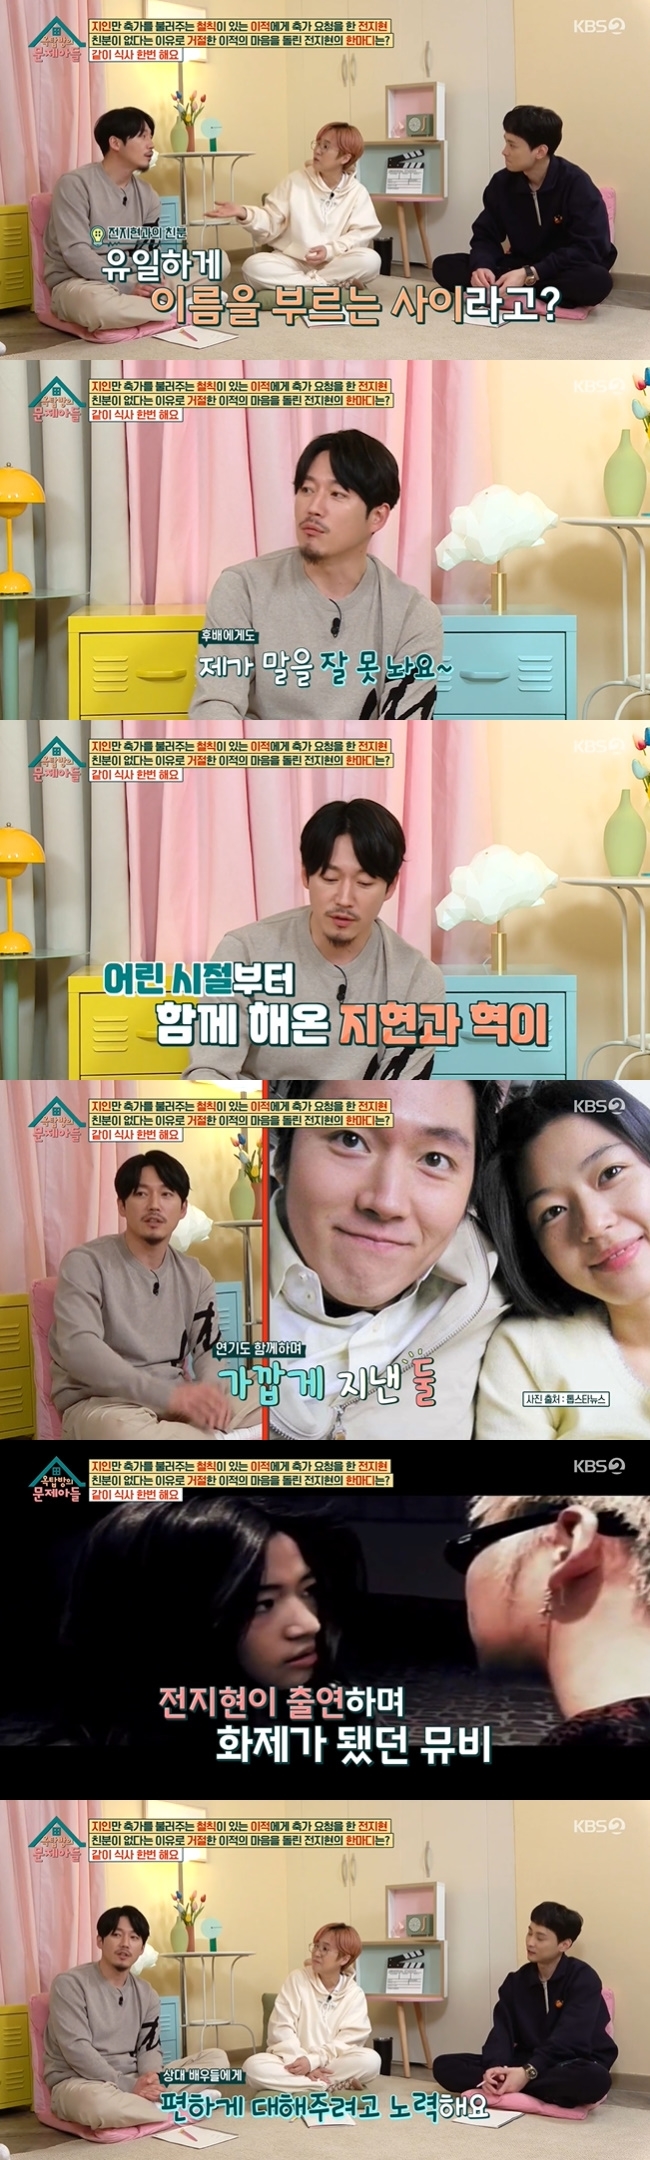 Jang Hyuk has revealed his longstanding relationship with Jun Ji-hyeun.On April 27, KBS 2TV The Trouble Son of the Rooftop, Jang Hyuk appeared for his best friend Kim Jong-kook.On the air, Lee Juck received a wedding celebration request from Jun Ji-hyun, but the story of his refusal was revealed.At that time, Jun Ji-hyun offered Lee Juck a meal, and Lee Juck was an acquaintance after having a meal with Jun Ji-hyun and his wife and children.When Jun Ji-hyeun was mentioned, the friendship between Jang Hyuk and Jun Ji-hyeun was also revealed.Im not good at talking, said Jang Hyuk, who said Jun Ji-hyeun was the only person to speak. Ji Hyun-i first came to the office in the third grade of junior high school and met him.I practiced acting together and then I became friendly, so I became comfortable with words. In a deep connection, Jun Ji-hyun even appeared in music videos when Jang Hyuk was working as TJ.When Sua mentioned that Jang Hyuk was a partner of all actresses, Jang Hyuk said, I try to be comfortable with my opponent.I met with the actors and talked about the work or talked about the schedule. Kim Jong-kook said, Jang Hyuk often talks serious. When he tries to fall into it, he turns it right back.I was worried that actors and juniors would not be uncomfortable because it is difficult to prevent them from talking. 